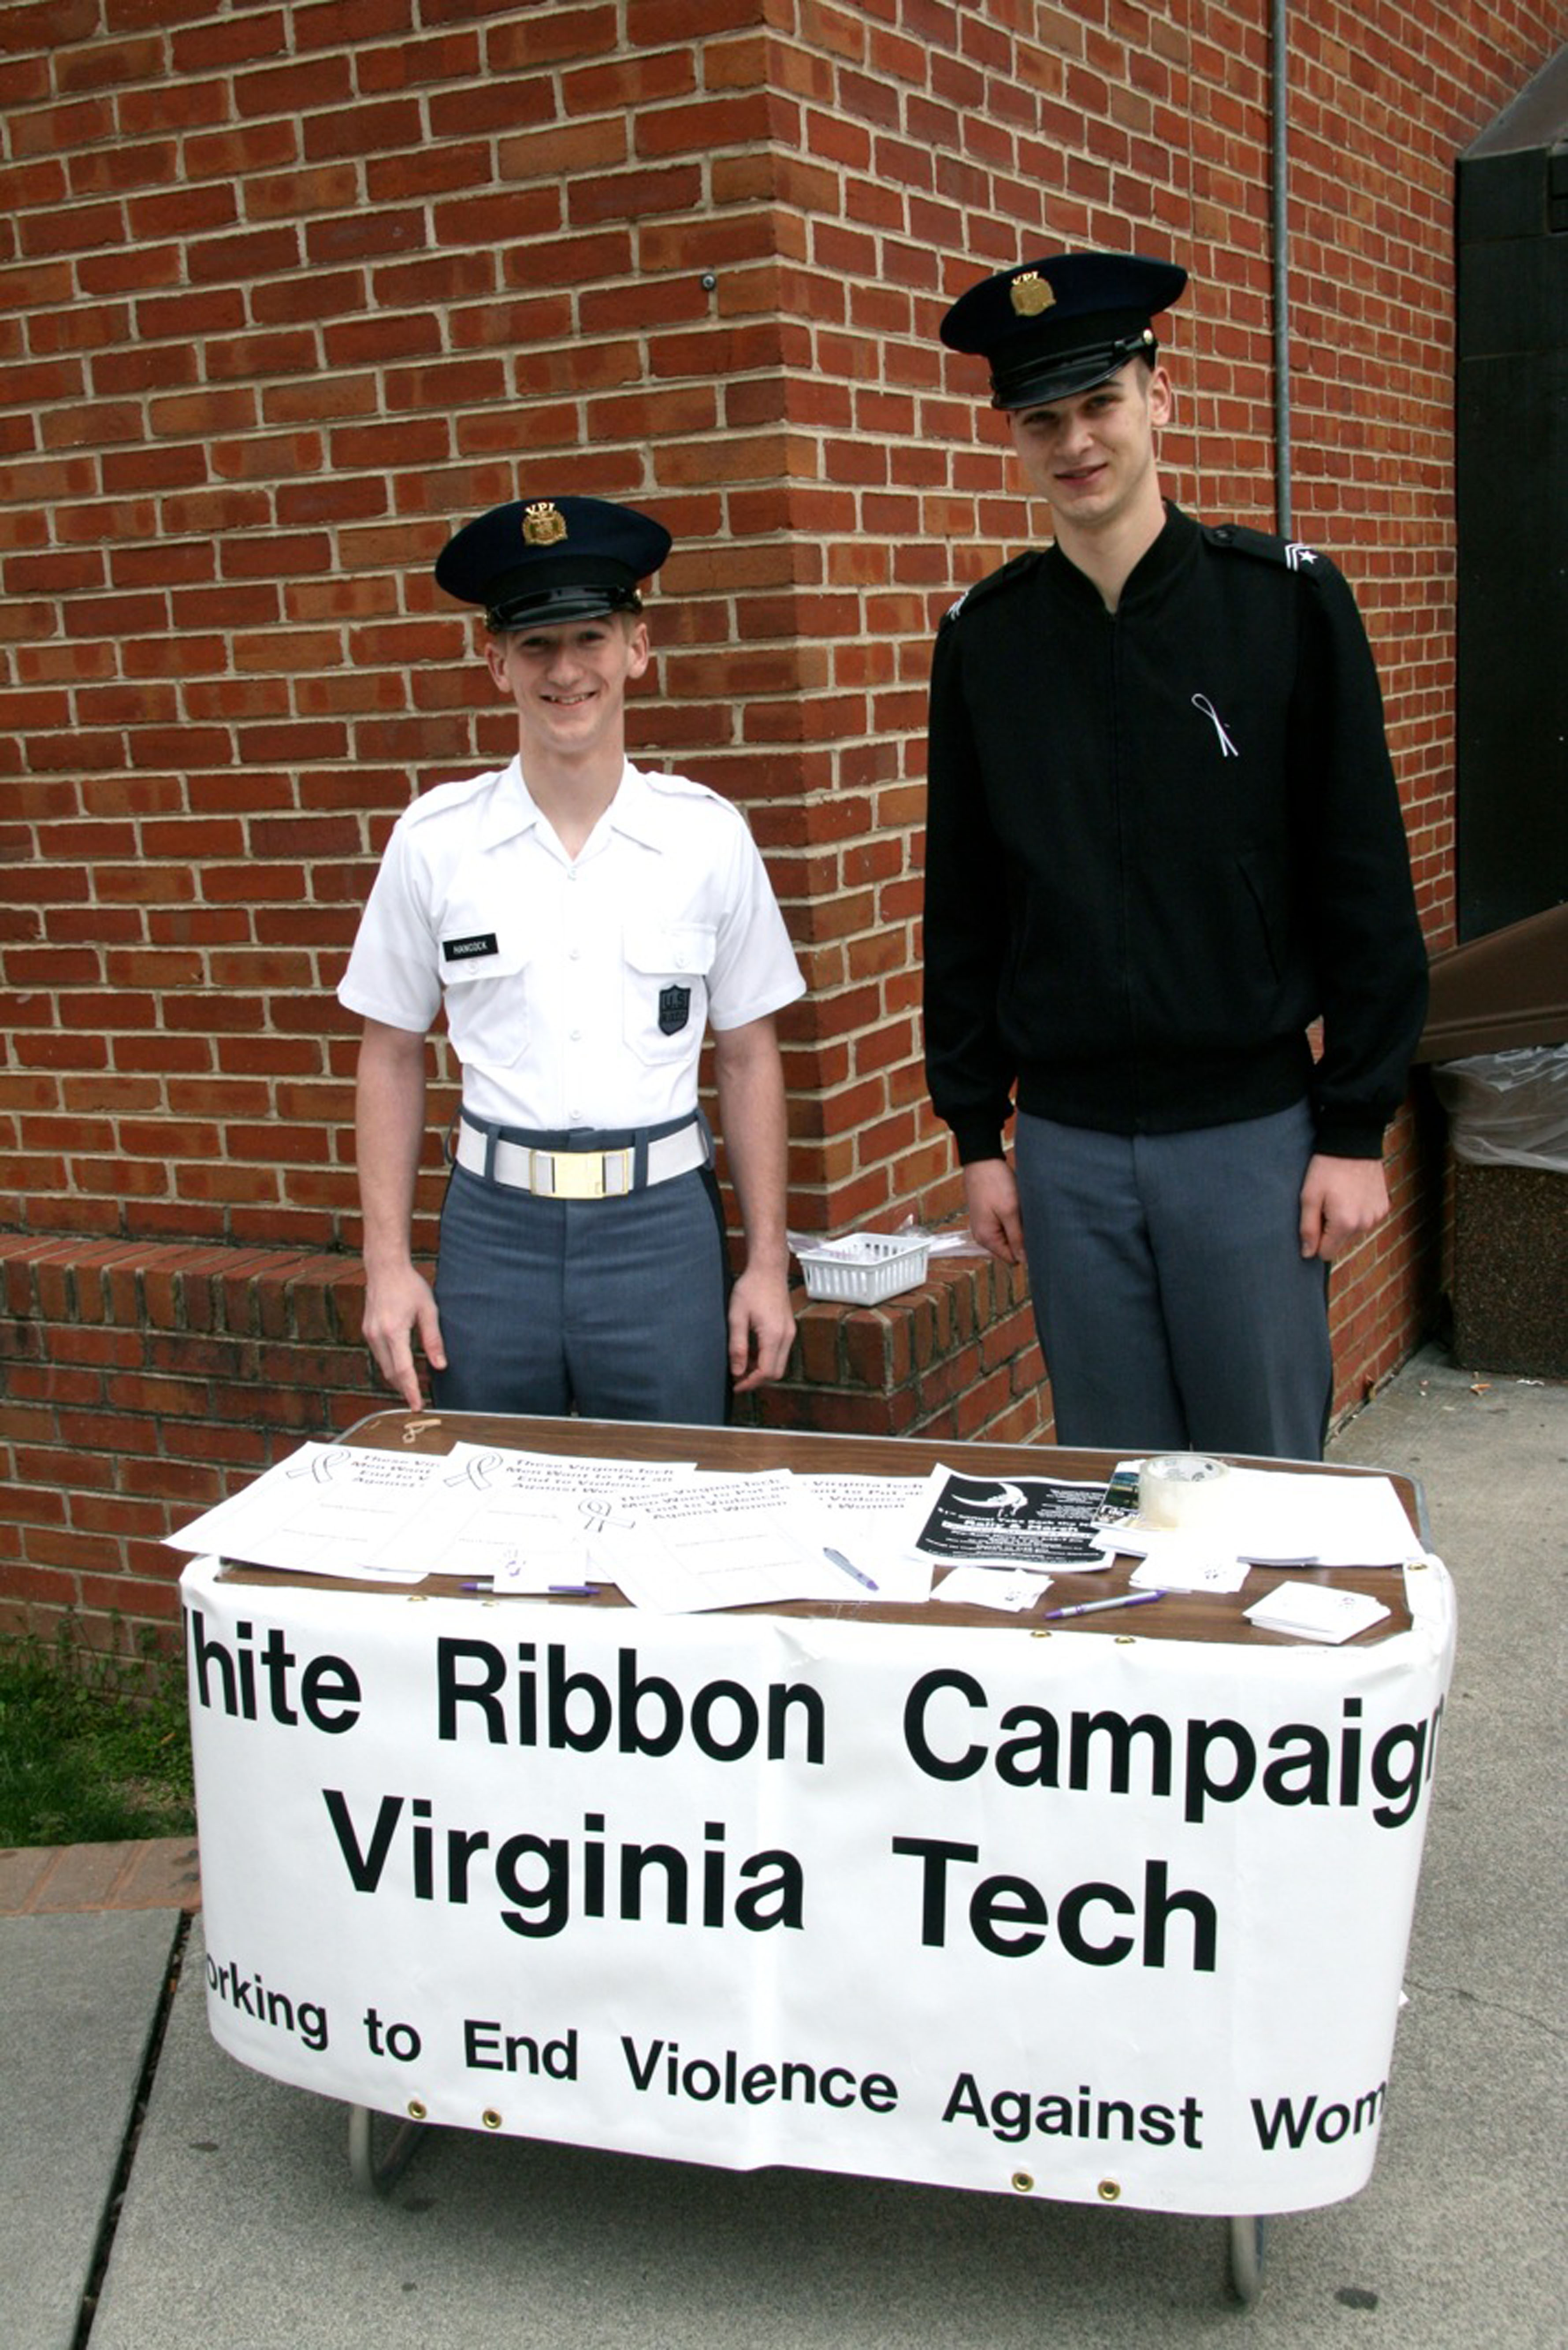 Members of Echo Company of the Virginia Tech Corps of Cadets man a table outside Squires Student Center during the White Ribbon Campaign last year.